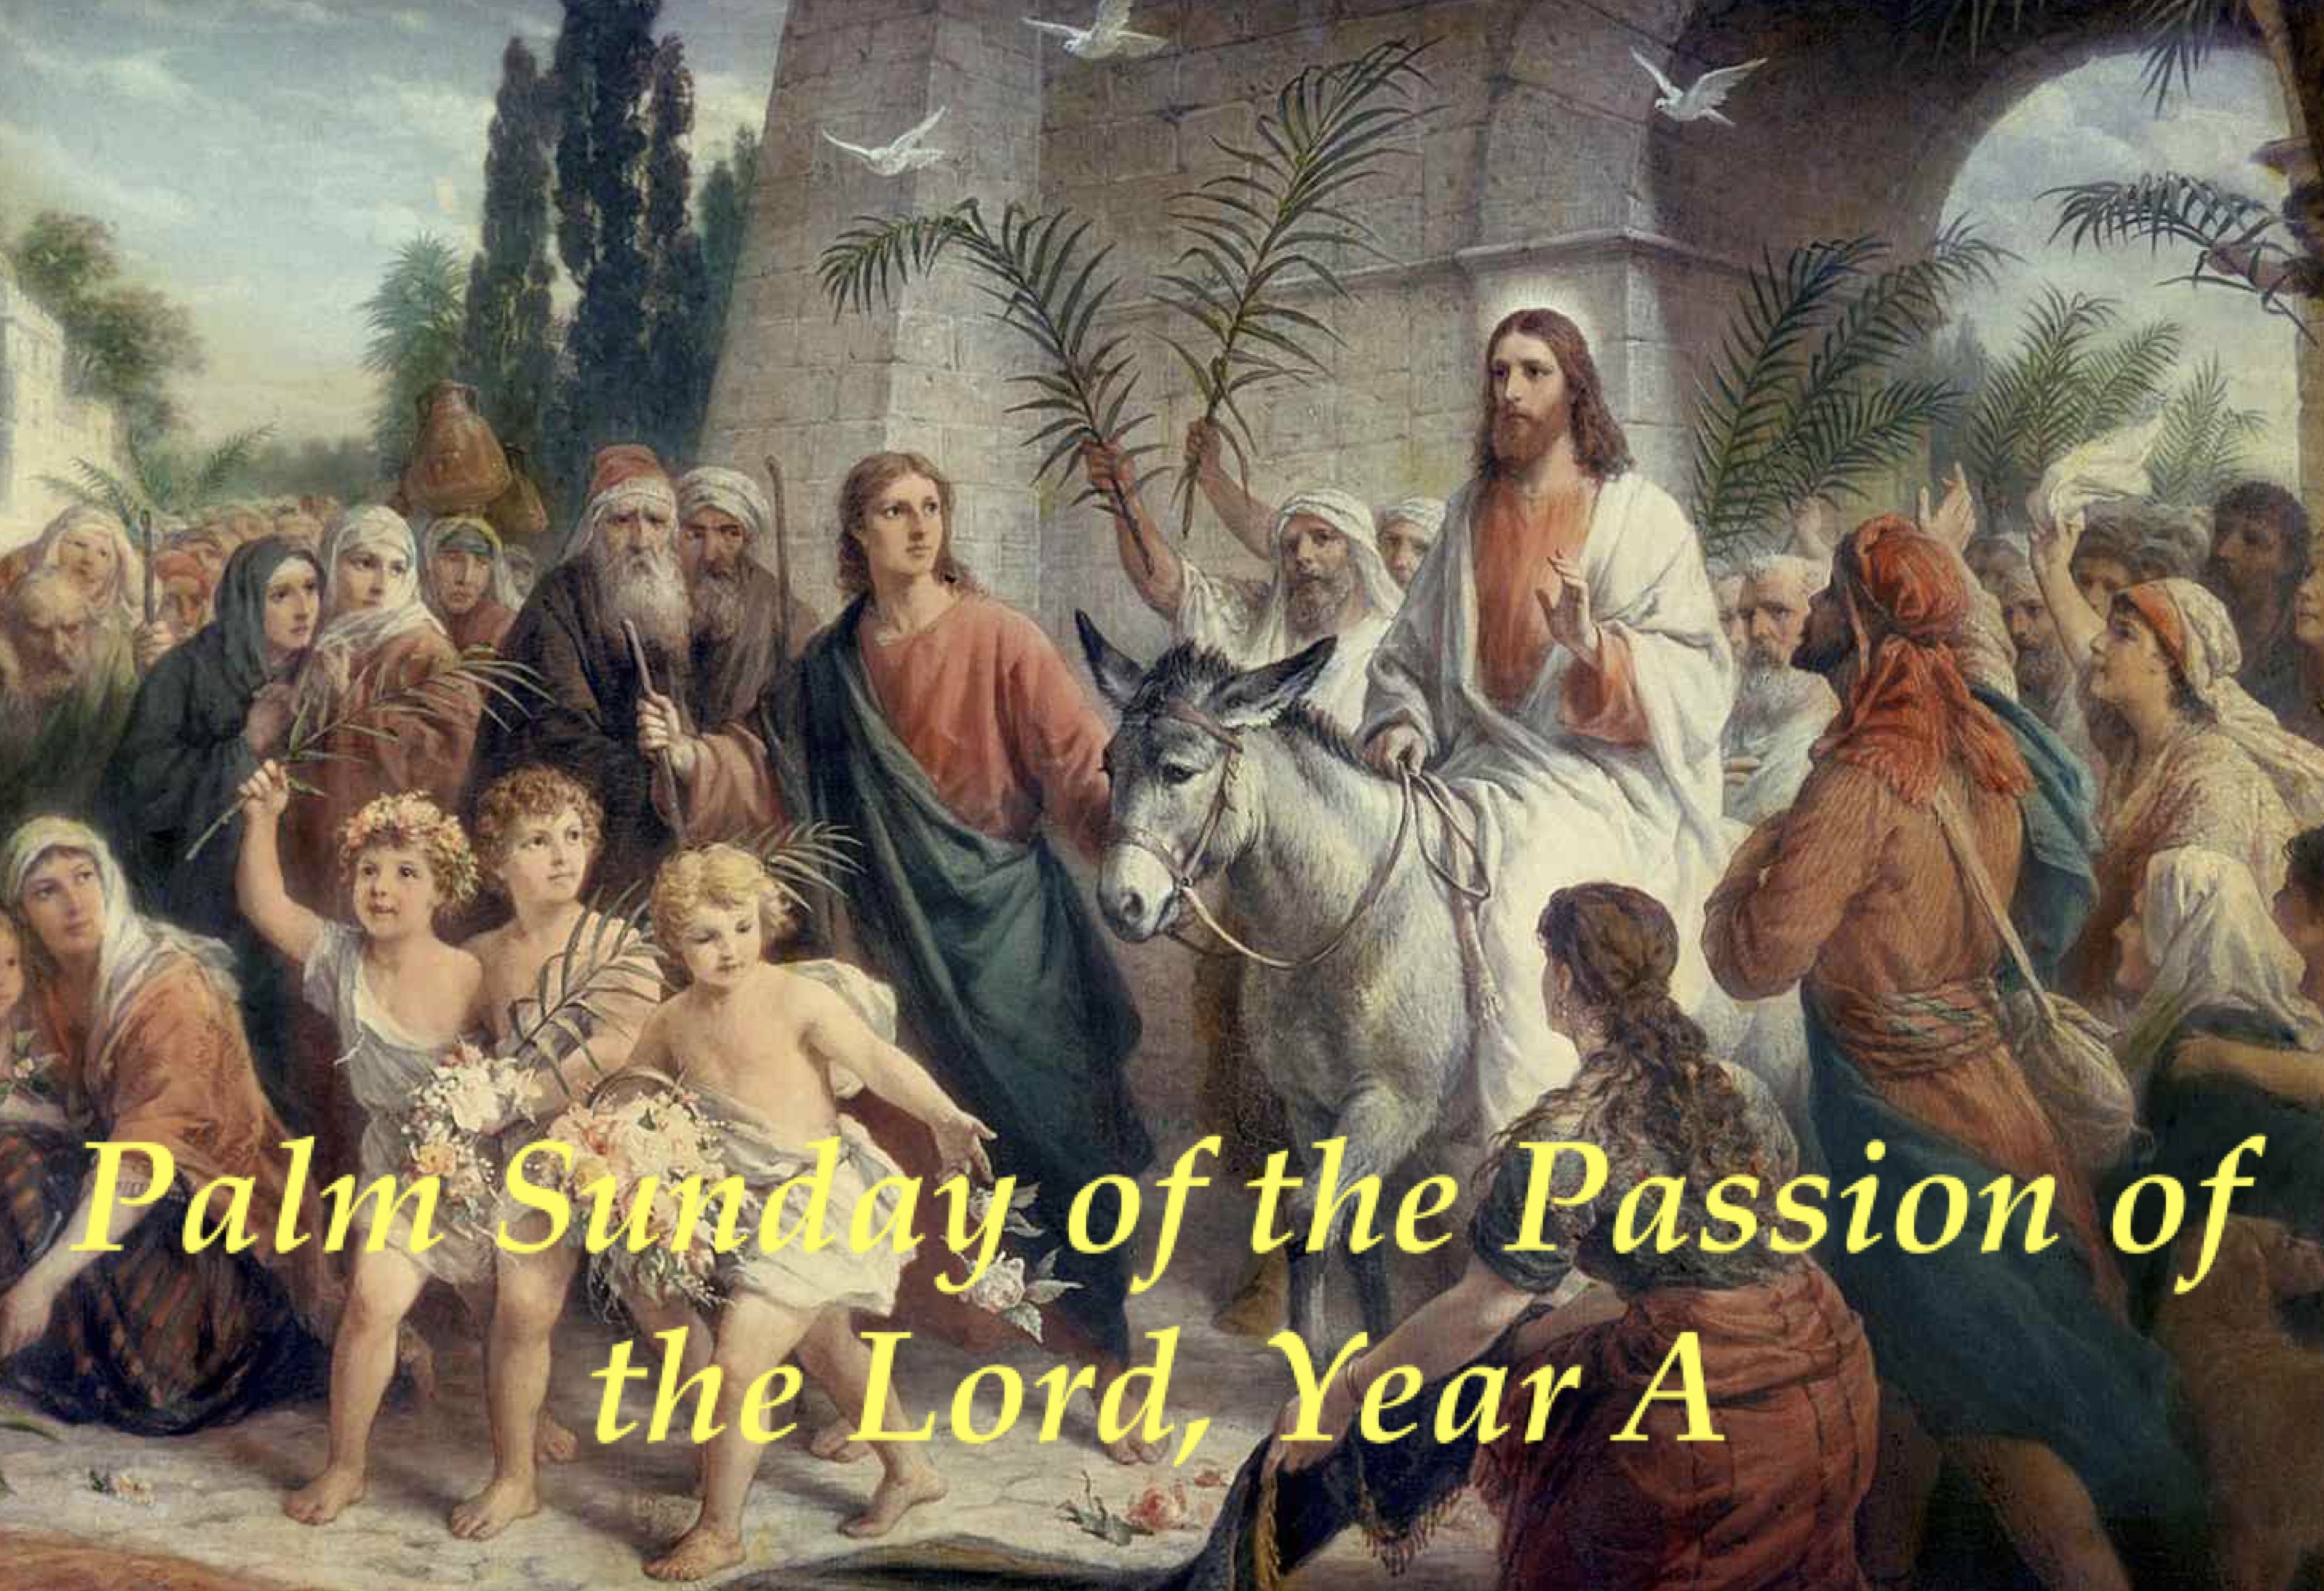 Palm Sunday of the Passion of the Lord, Year A